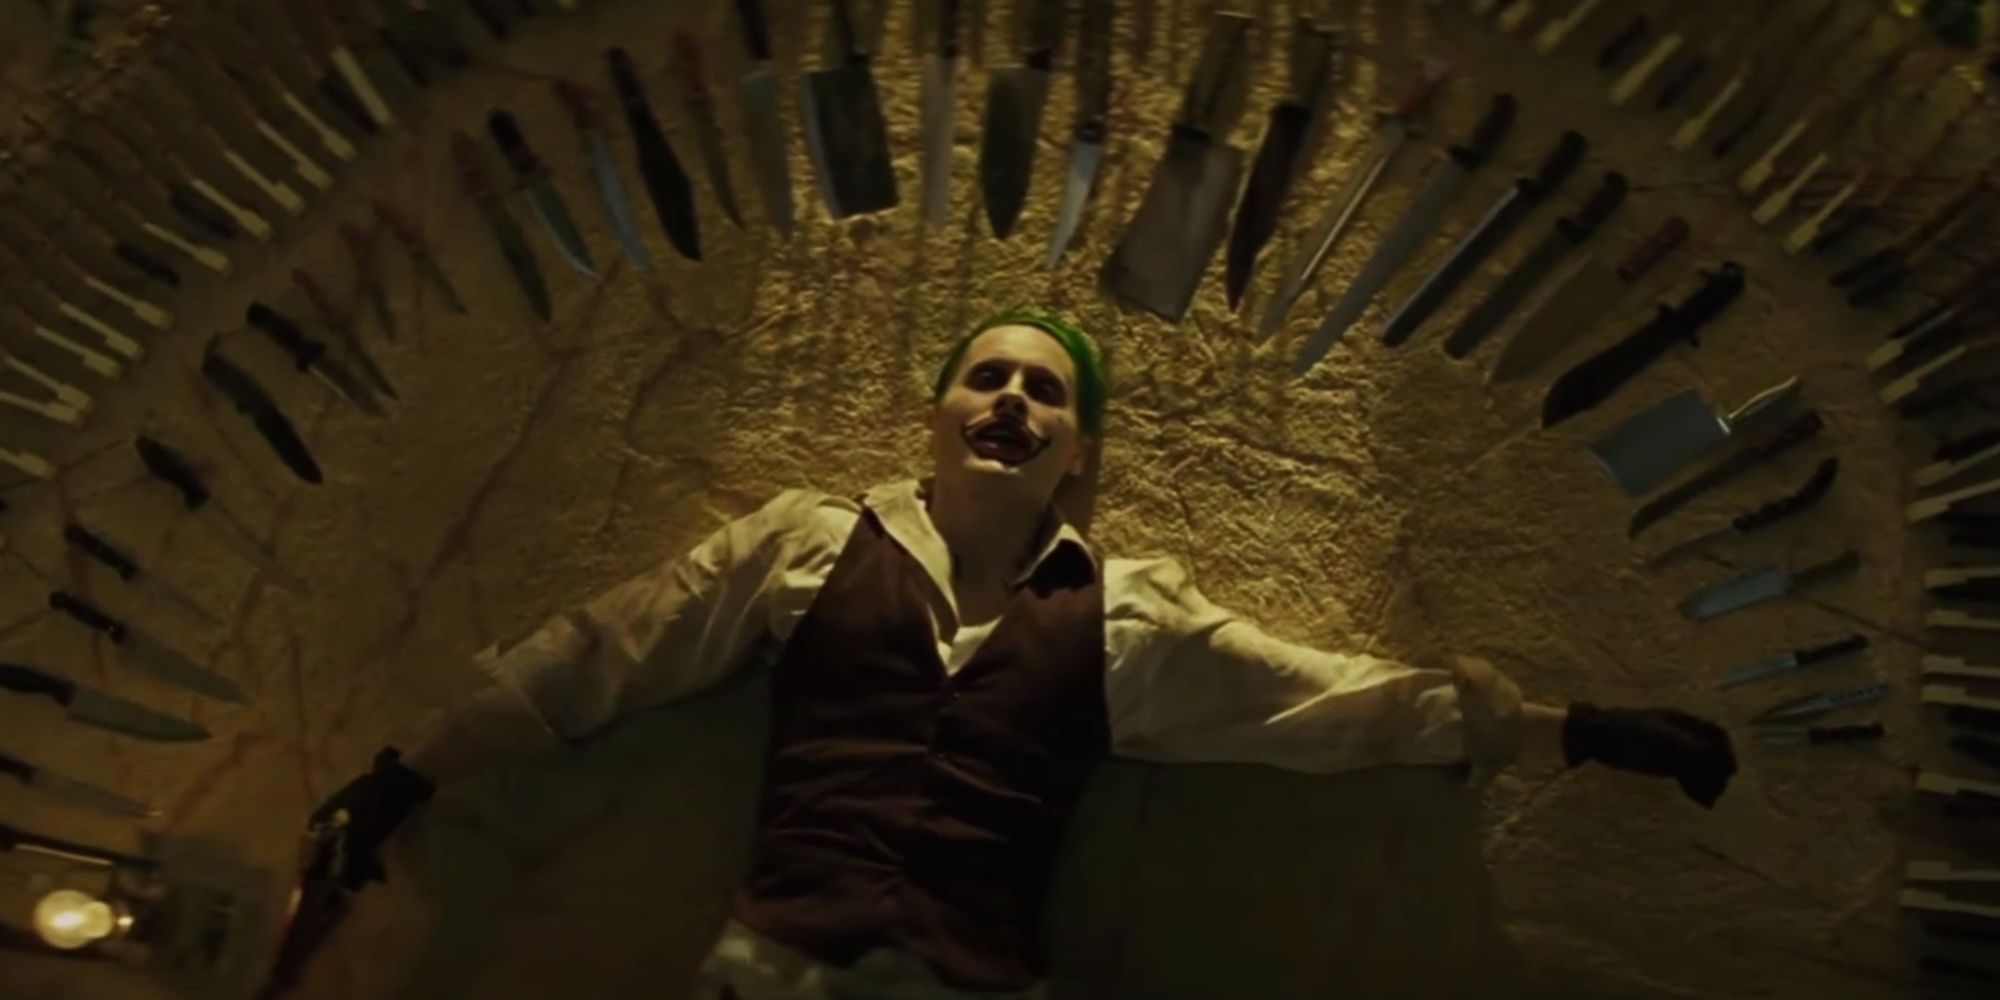 Jared Leto’s Joker lays surrounded by knives and weapons in Suicide Squad